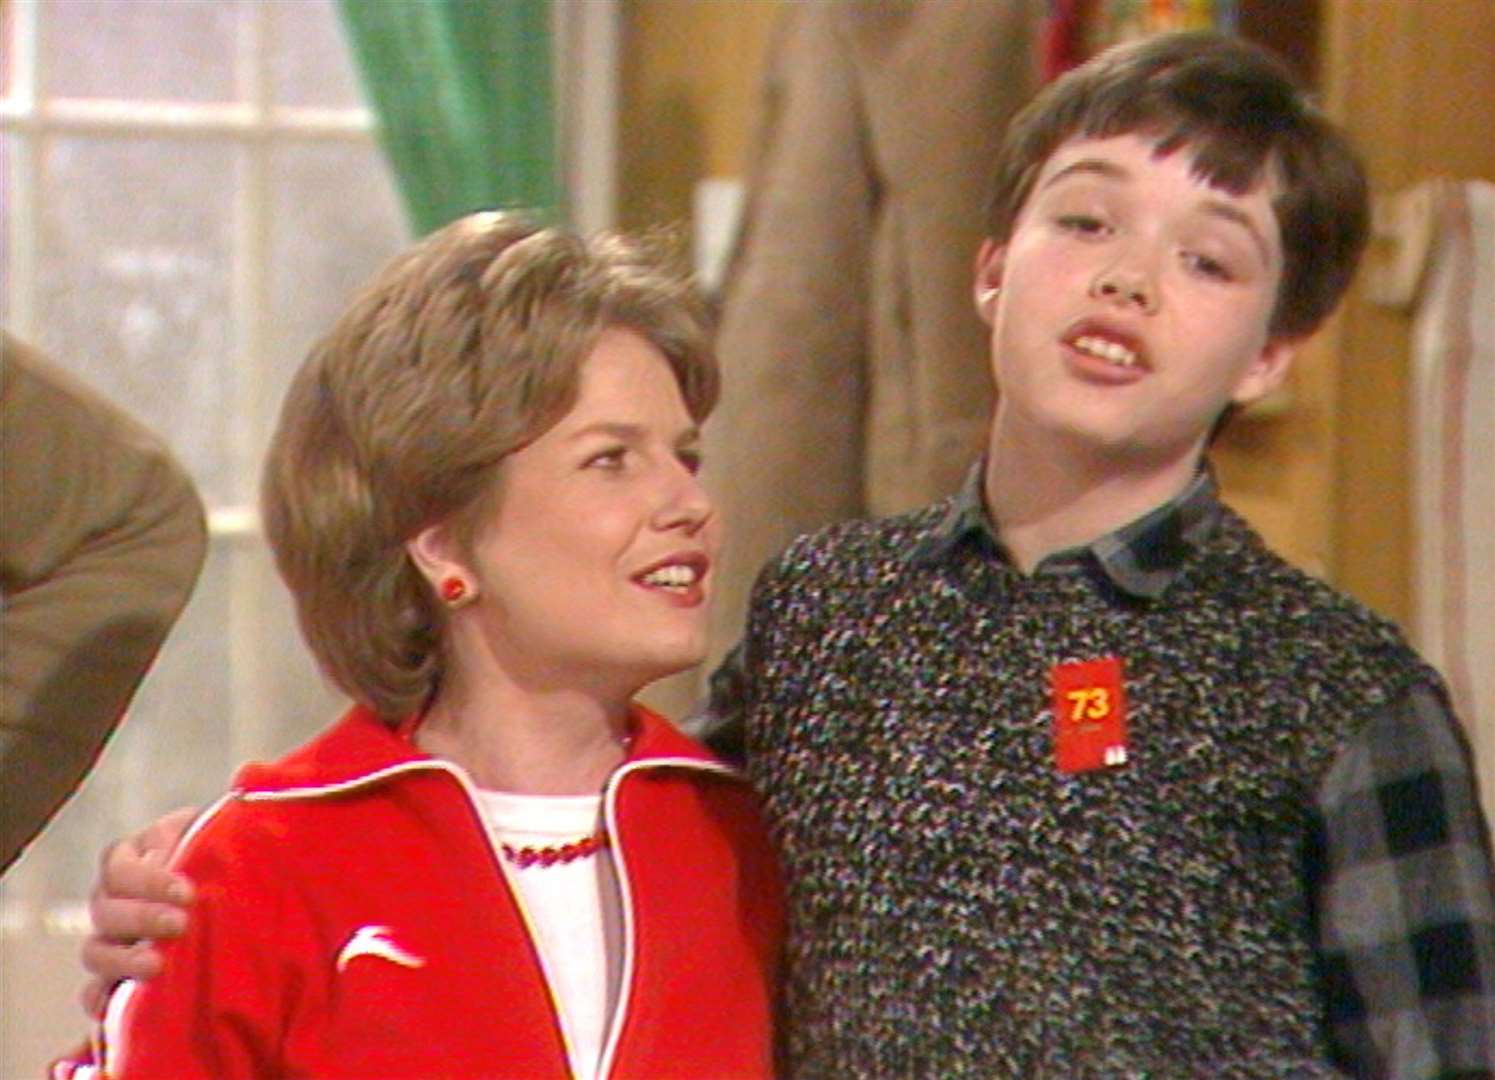 A young Sandi Toksvig, and an even younger Nic Ayling, introduce the Sandwich Quiz on Saturday morning children's show Number 73, made by TVS at Vinters Park studios, Maidstone.